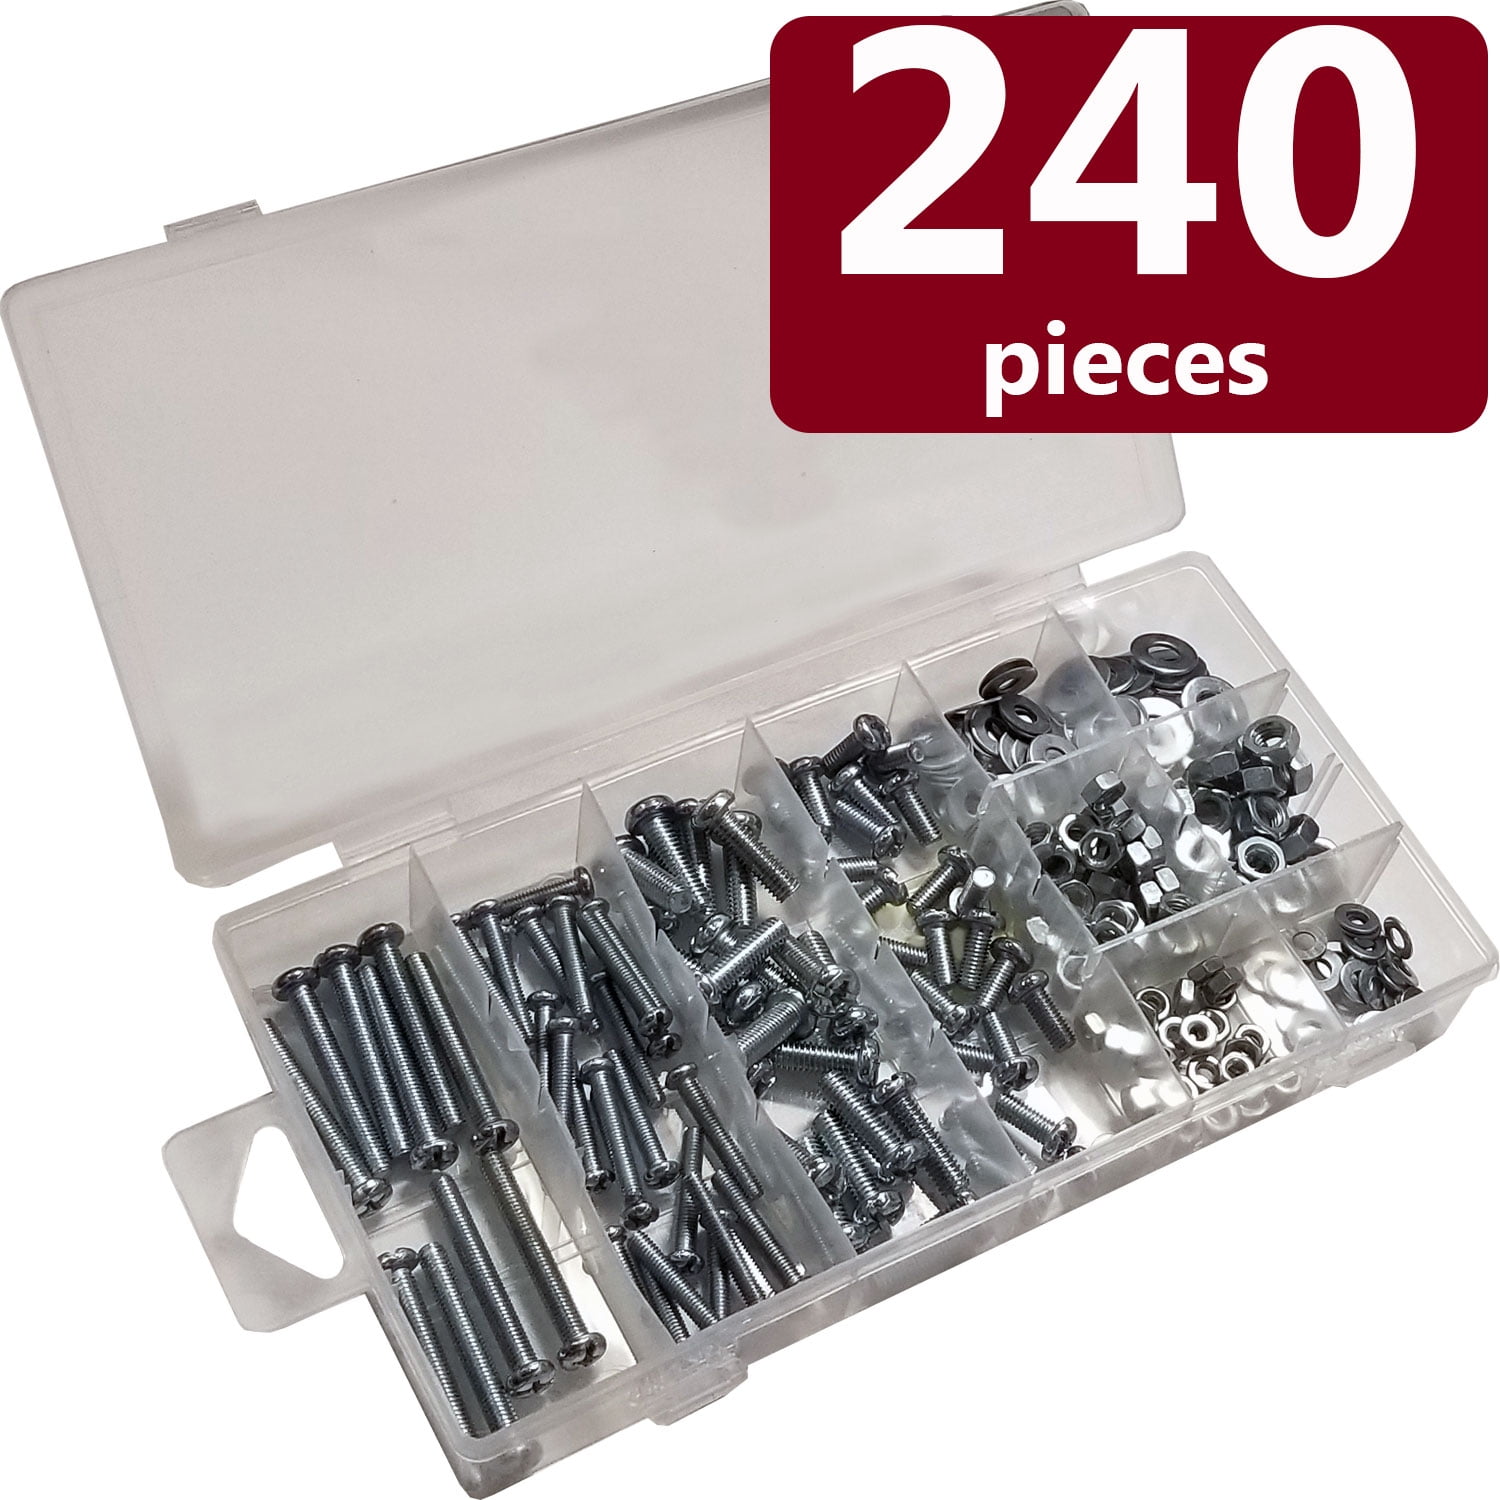 Screw Nut Set M2.5 Fastener Bolts And Nuts Kit for Home Office Appliance 